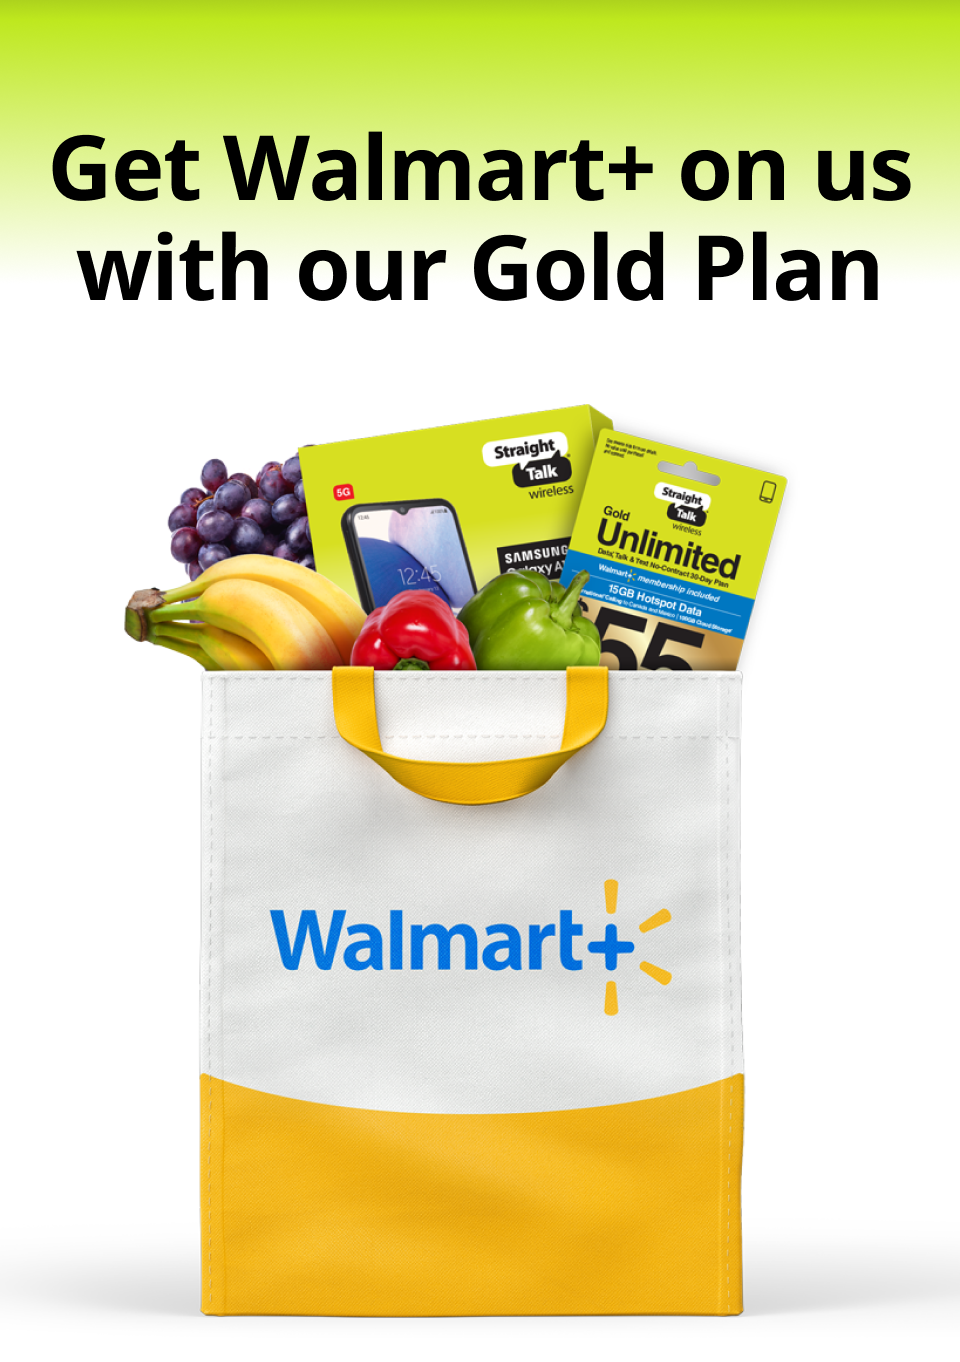 Walmart+ Included with our Gold Plan!